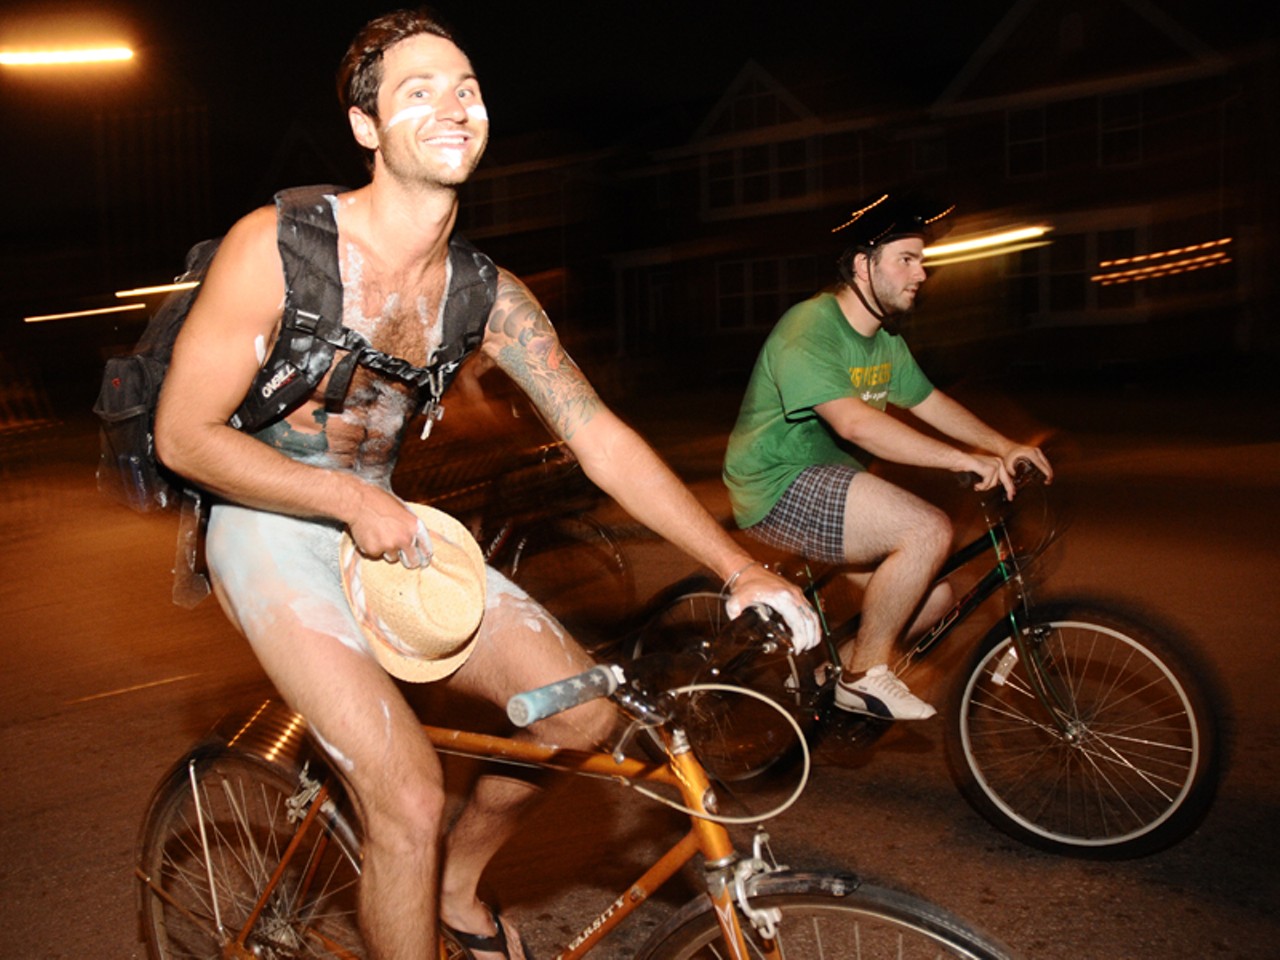 A ride-by cover-up, from the World Naked Bike Ride on August 15. See more photos here.